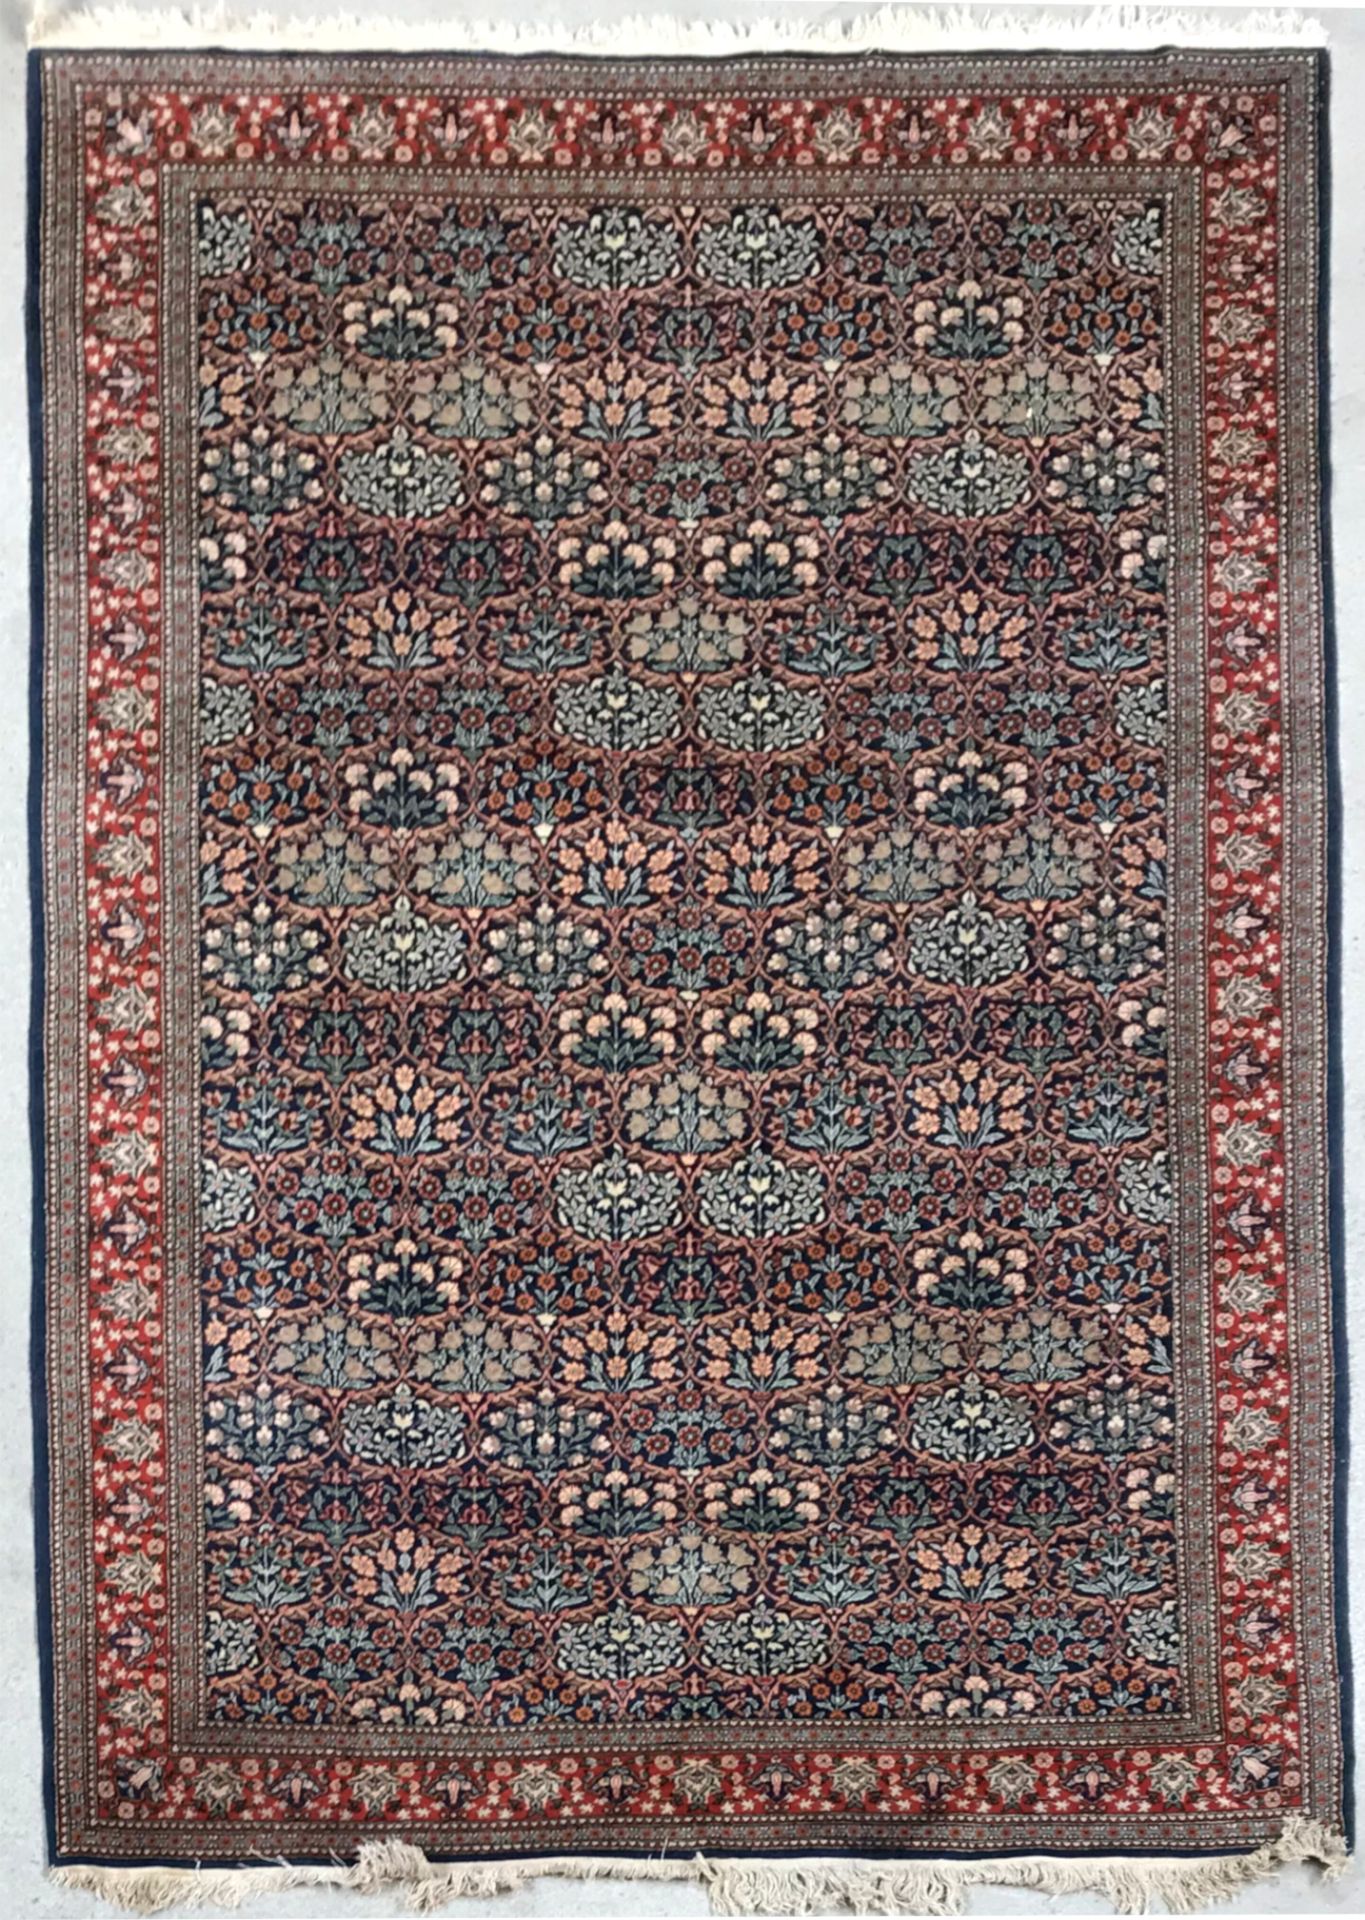 Null Persian carpet with millefiori decoration on blue field. Floral border with&hellip;